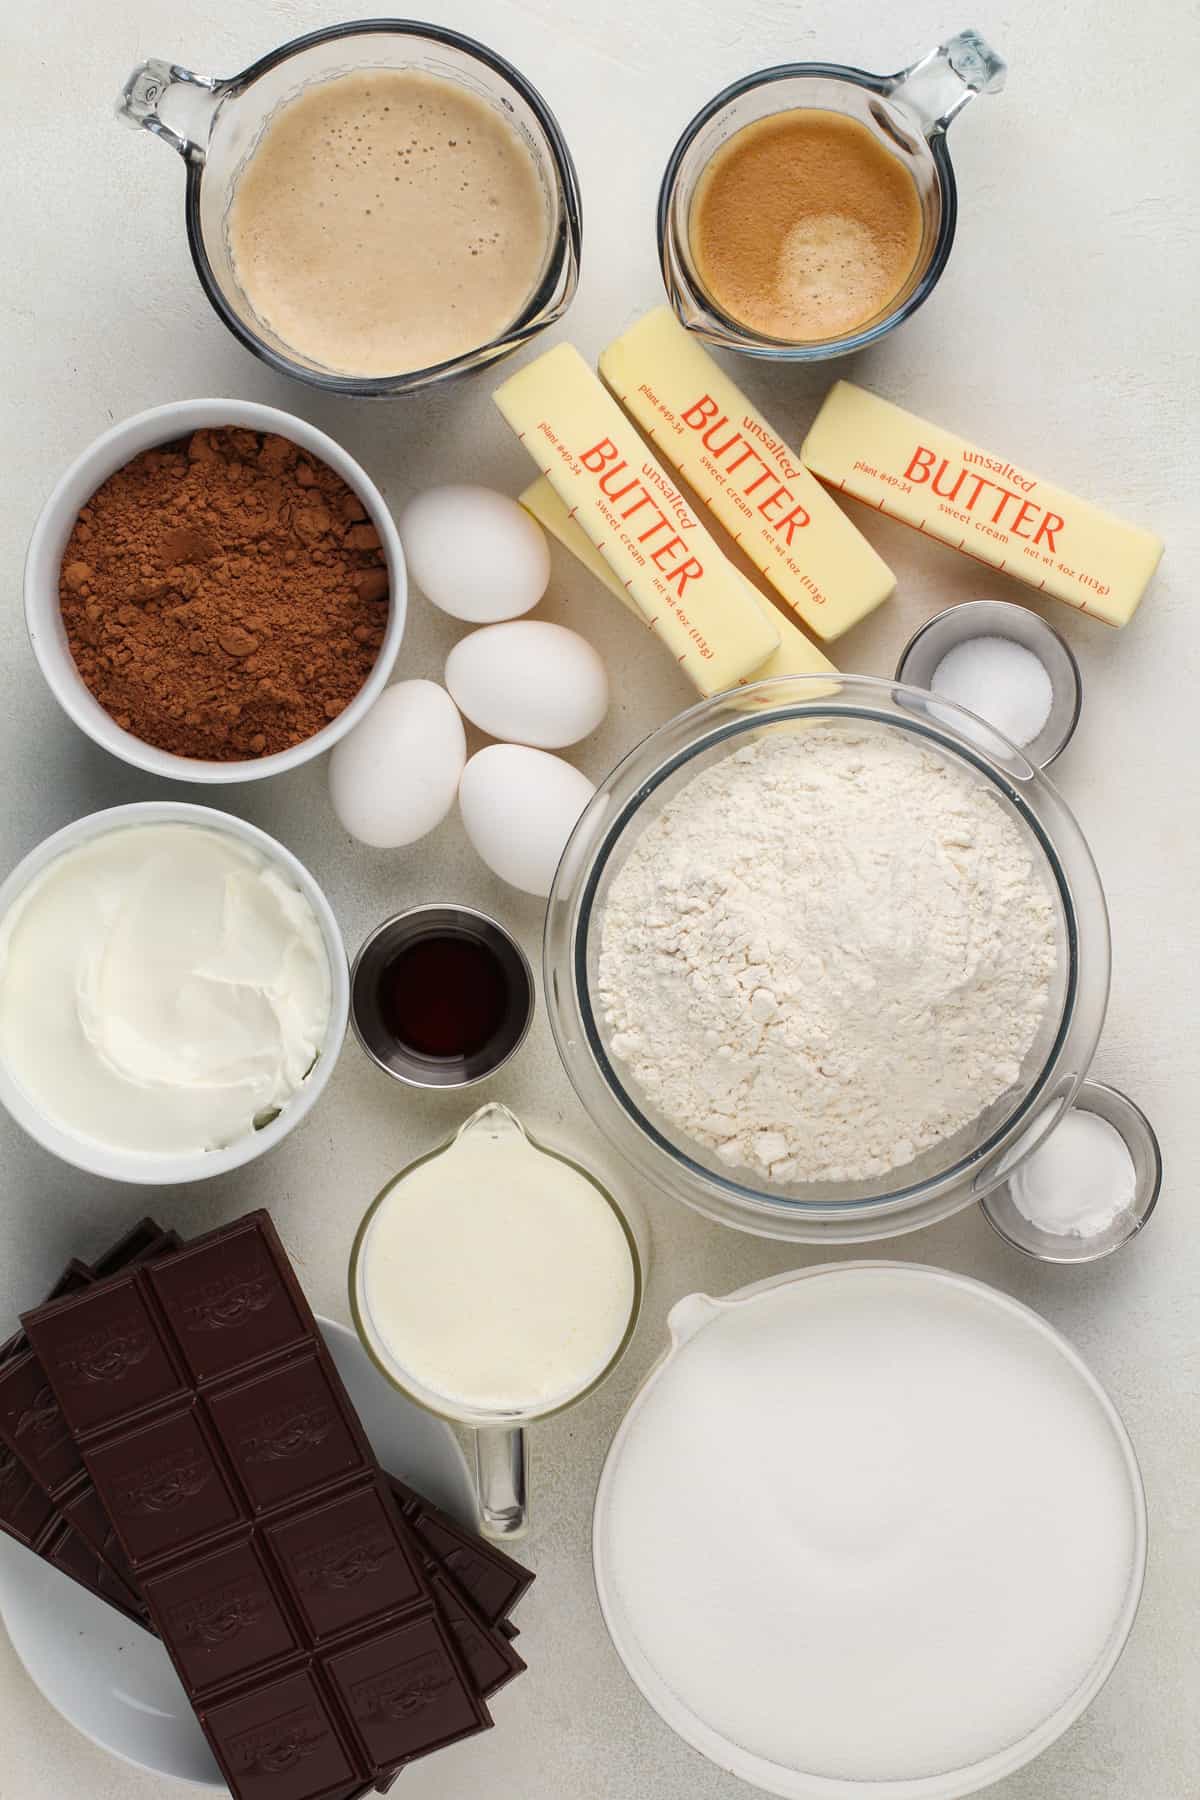 Ingredients for chocolate guinness cake arranged on a beige countertop.